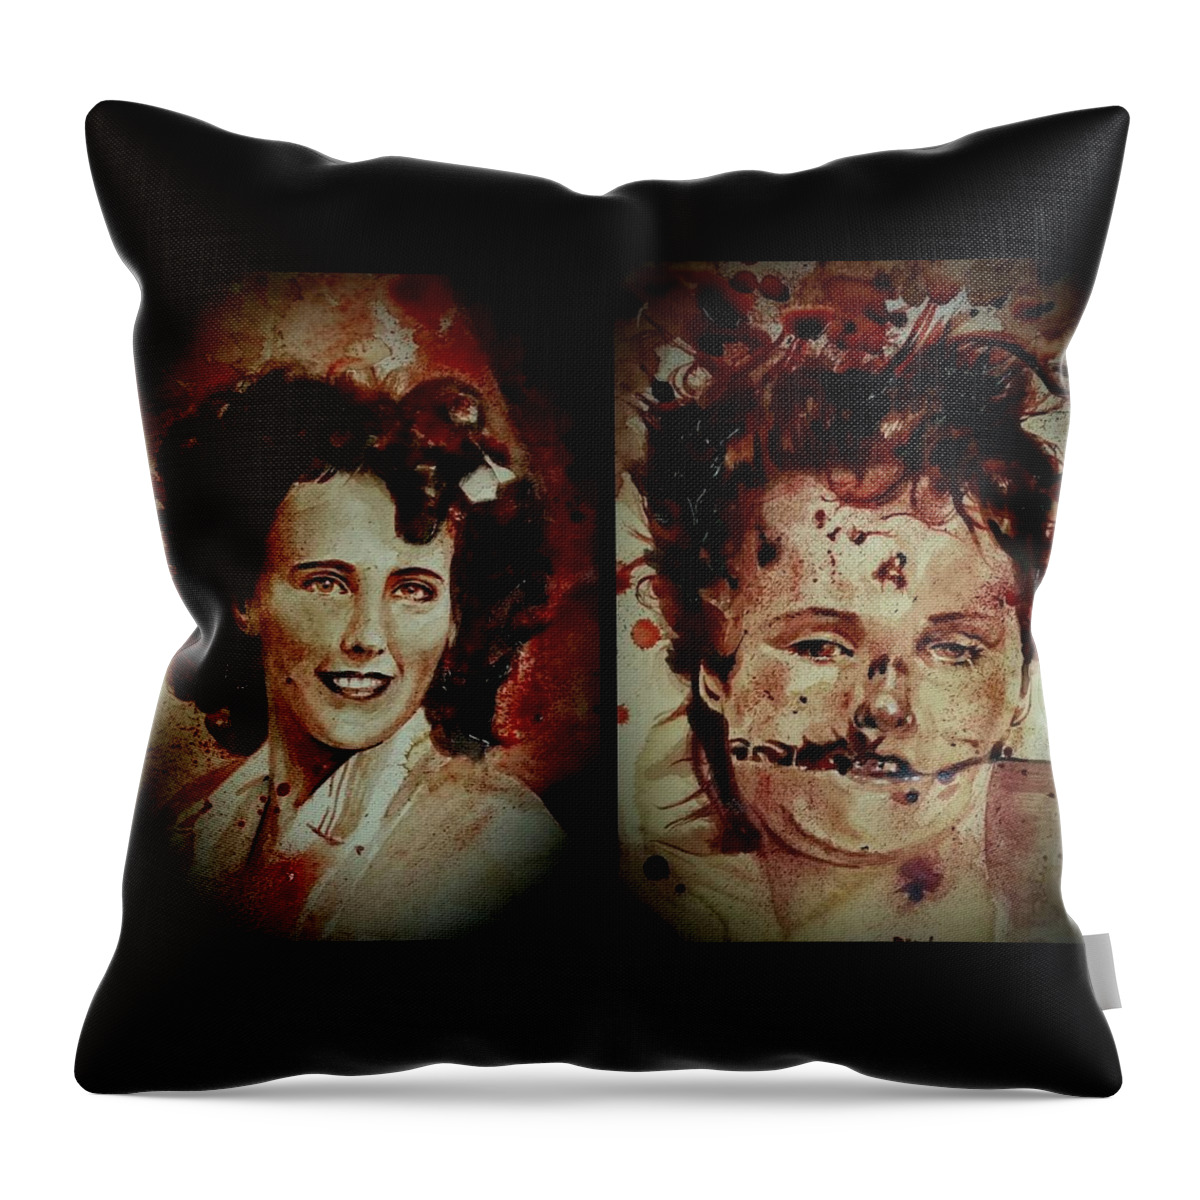 Ryan Almighty Throw Pillow featuring the painting Black Dahlia Elizabeth Short before and after by Ryan Almighty